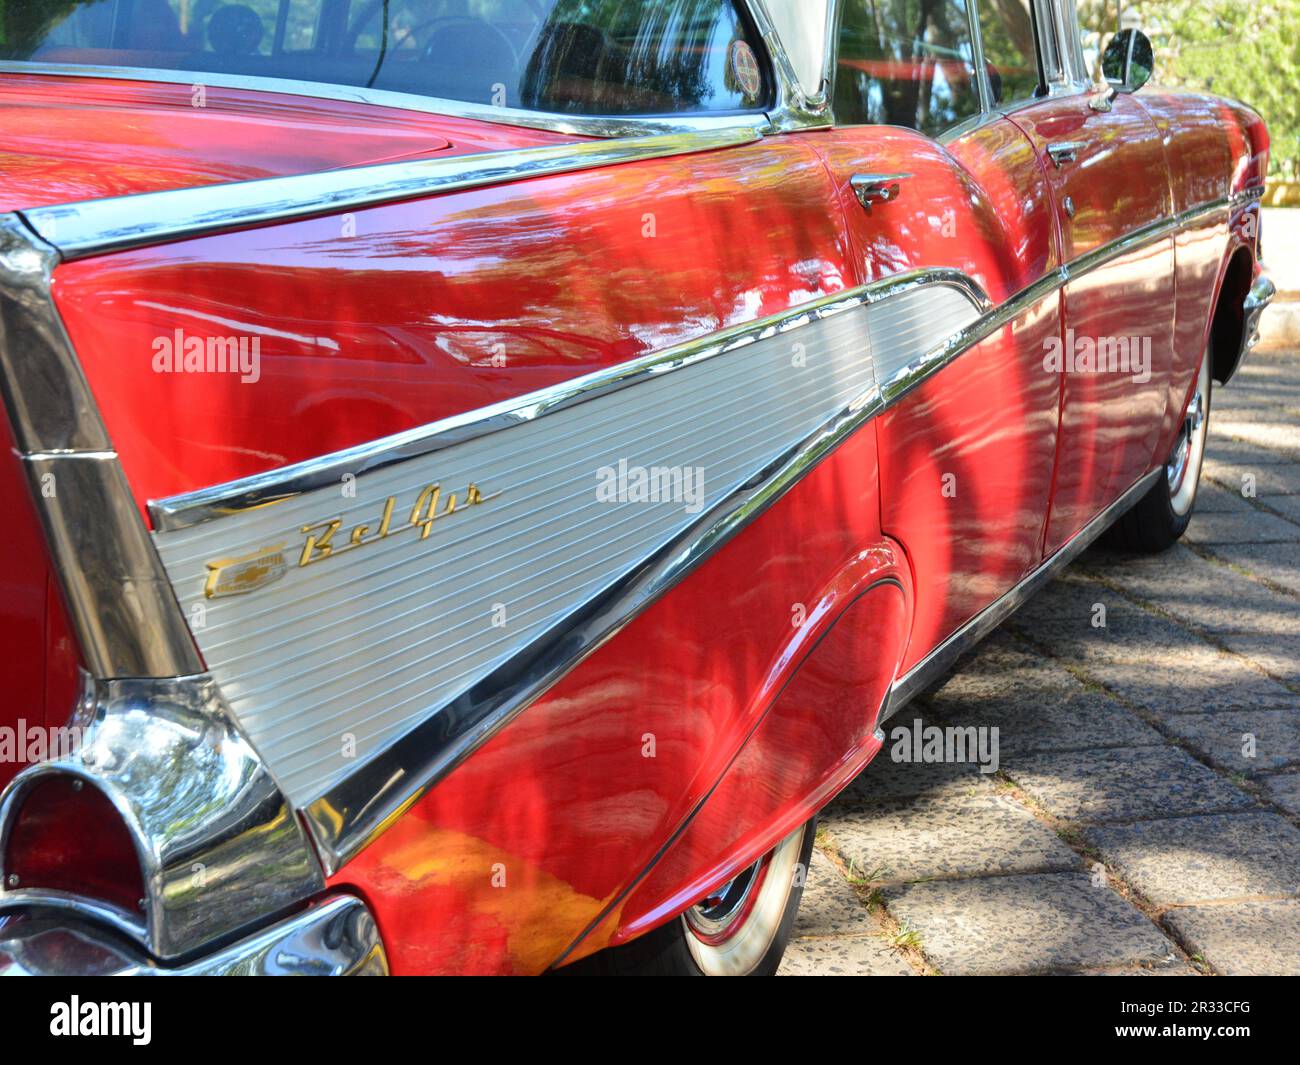 Vintage Belair chevrolet car on exhibition of vintage cars in Brazil, South America, side view of the bodywork, red color, highlight for the name BelA Stock Photo